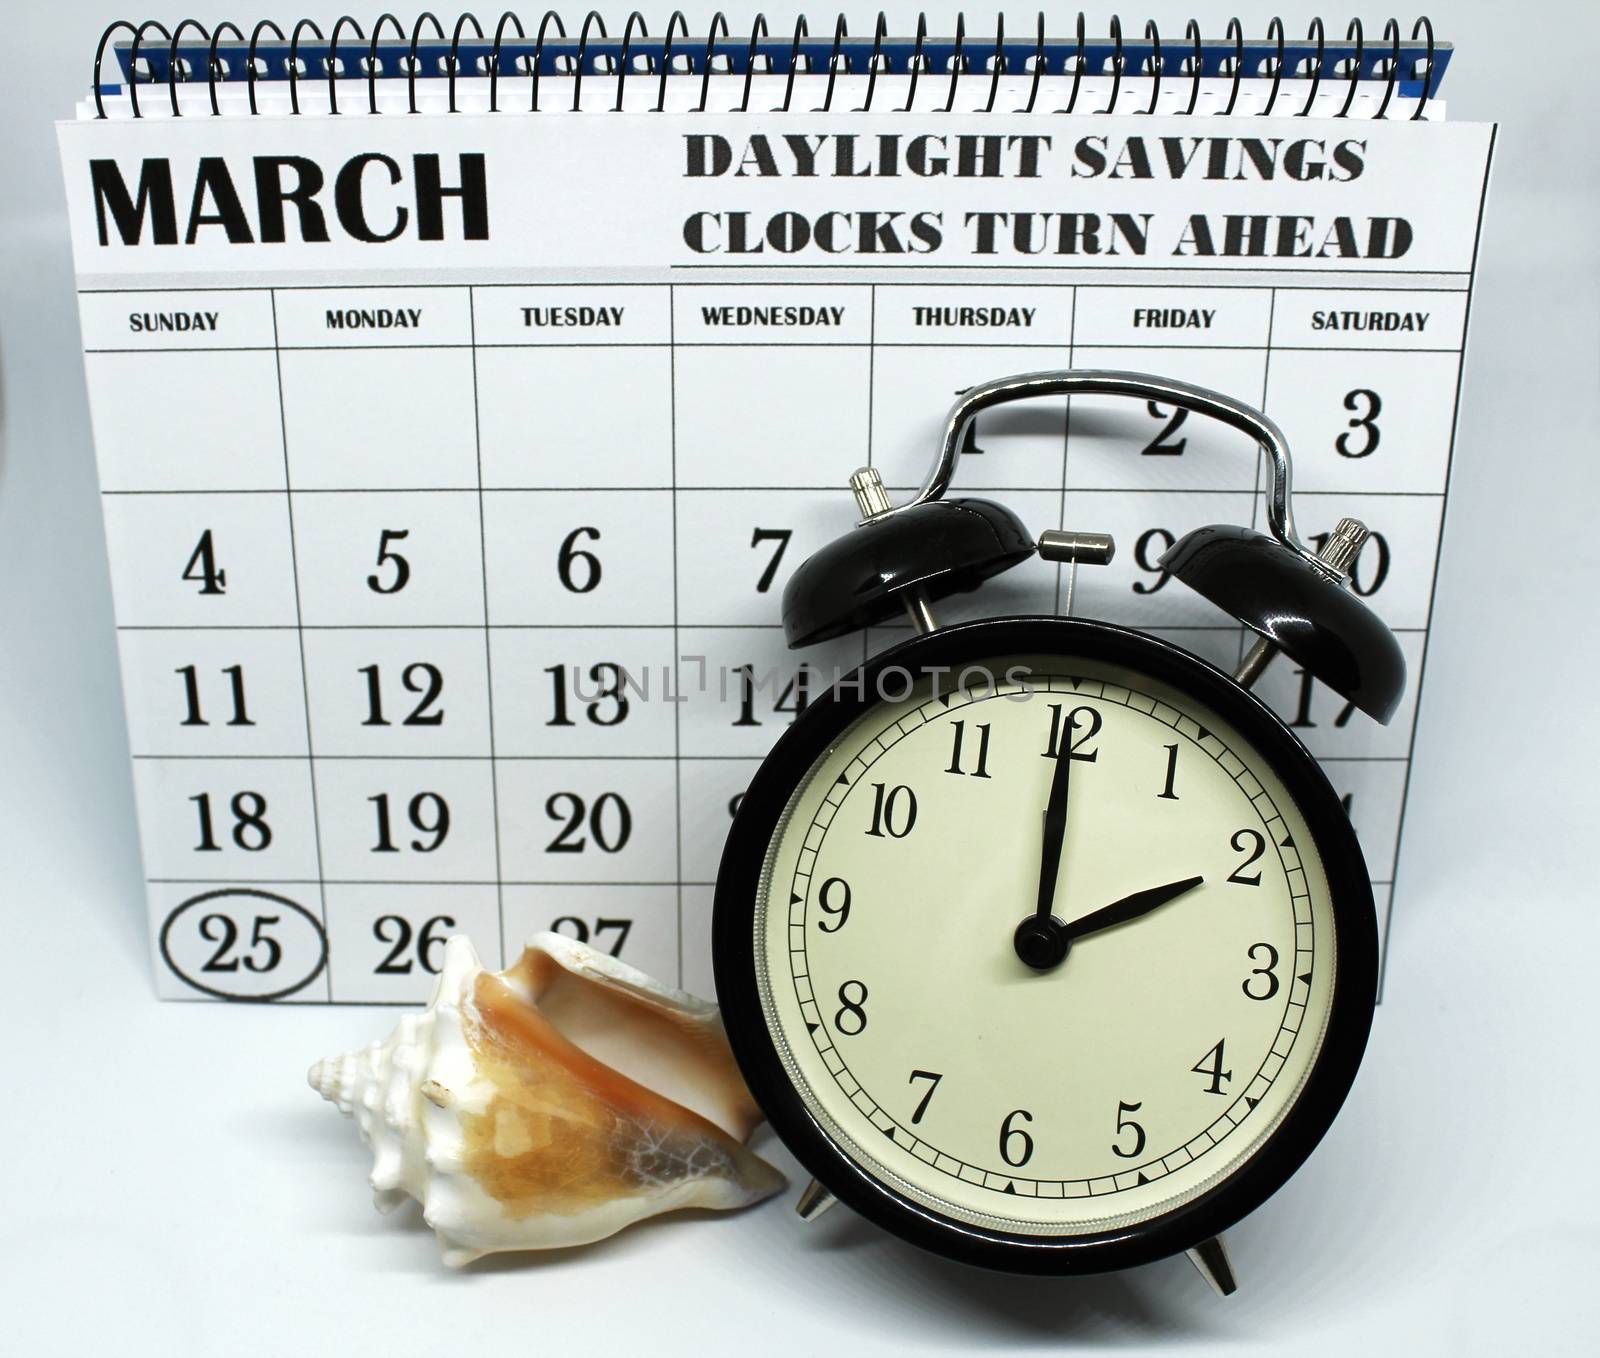 Daylight Savings Spring Forward sunday at 2:00 a.m. March 25 date indicated in the calendar. Clock next to a conch.